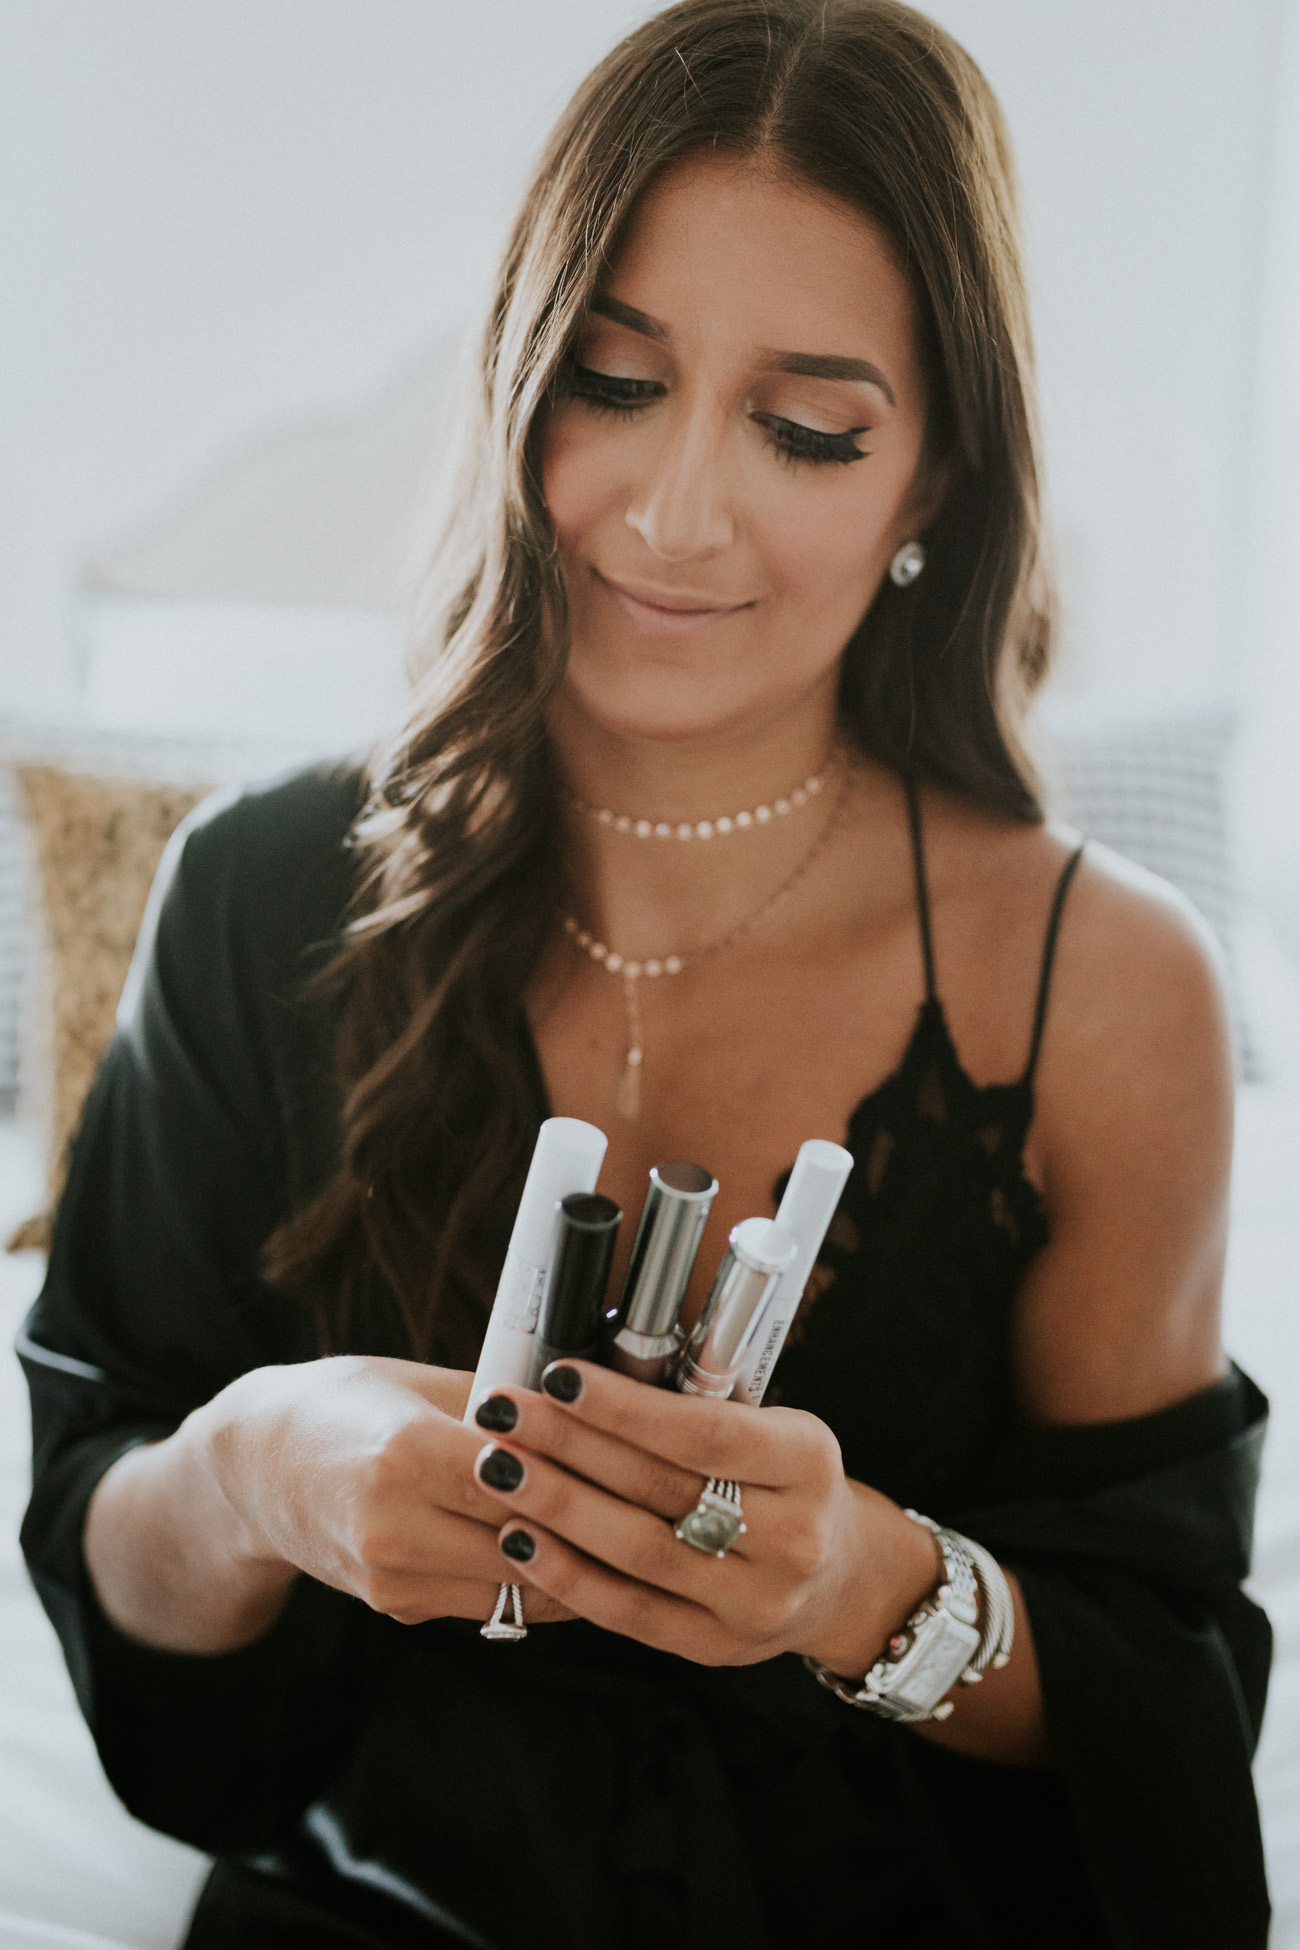 how to get long lashes, how to get long eyelashes, eyelash serum, lash boost, neulash serum, eyelash serums, condition eyelashes, favorite mascaras, lengthening mascaras, a southern drawl eyelashes, eyelash extensions // grace wainwright a southern drawl